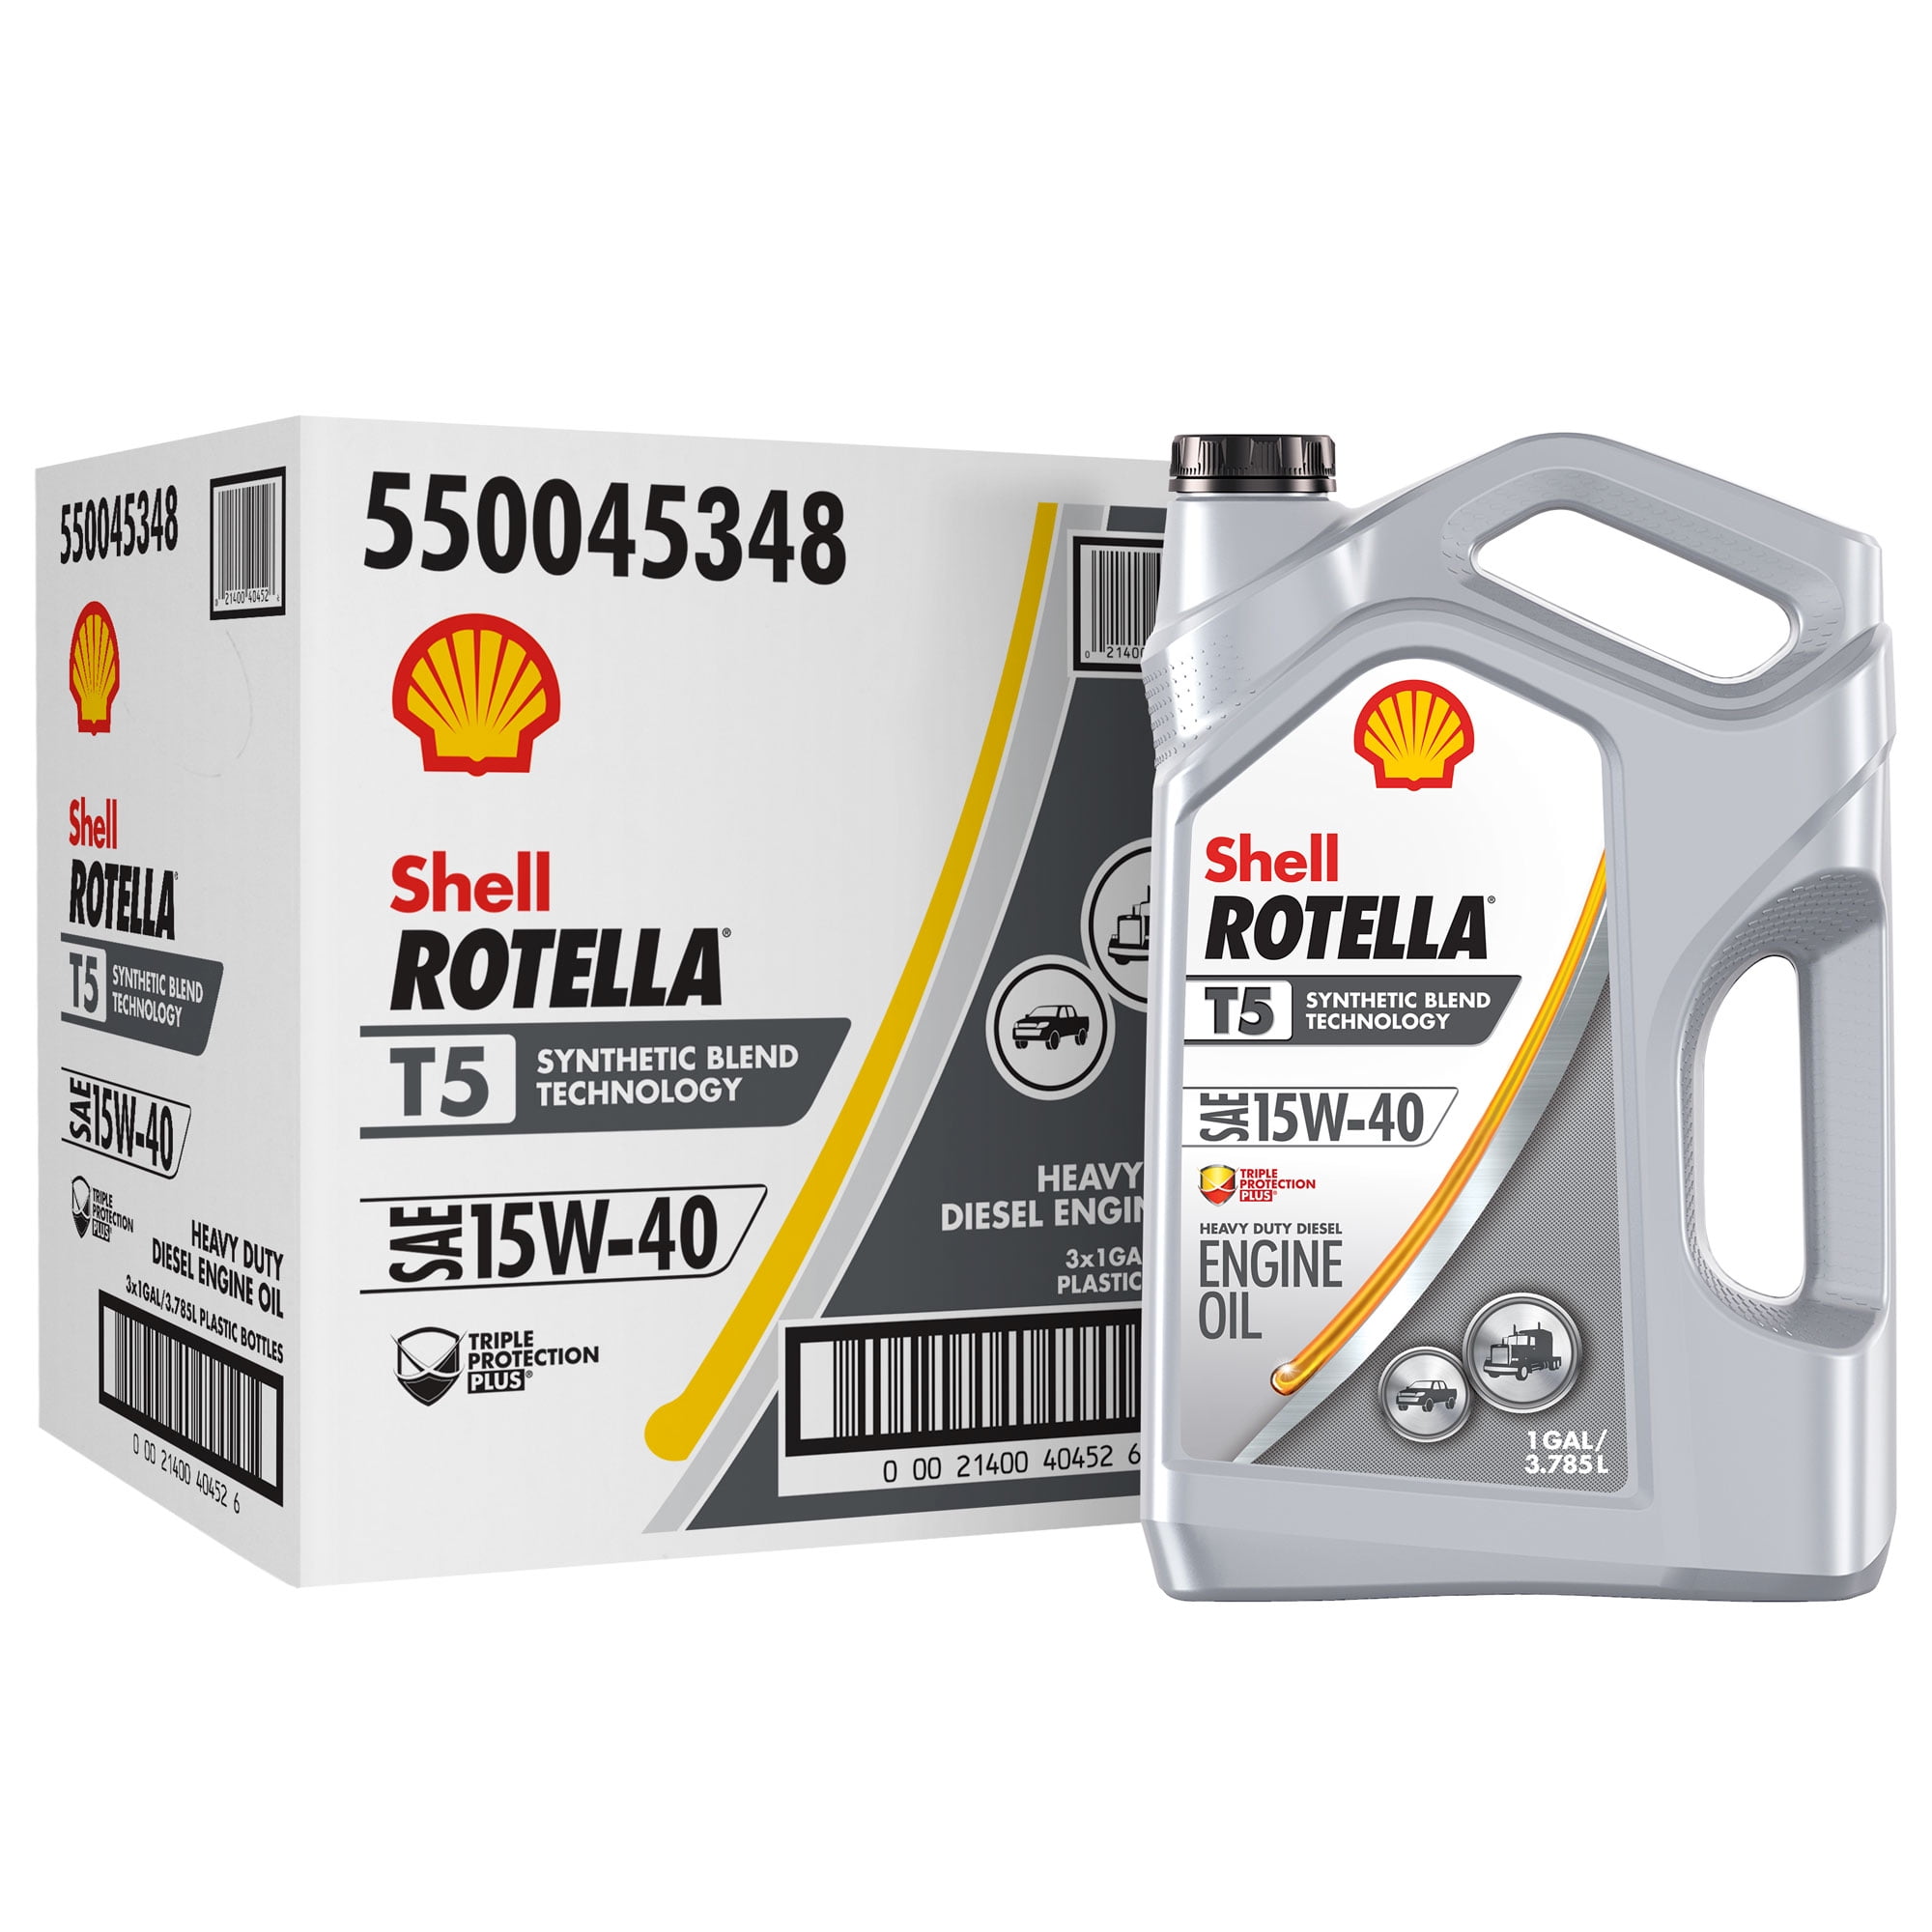 Does Shell Rotella T5 Have Zinc